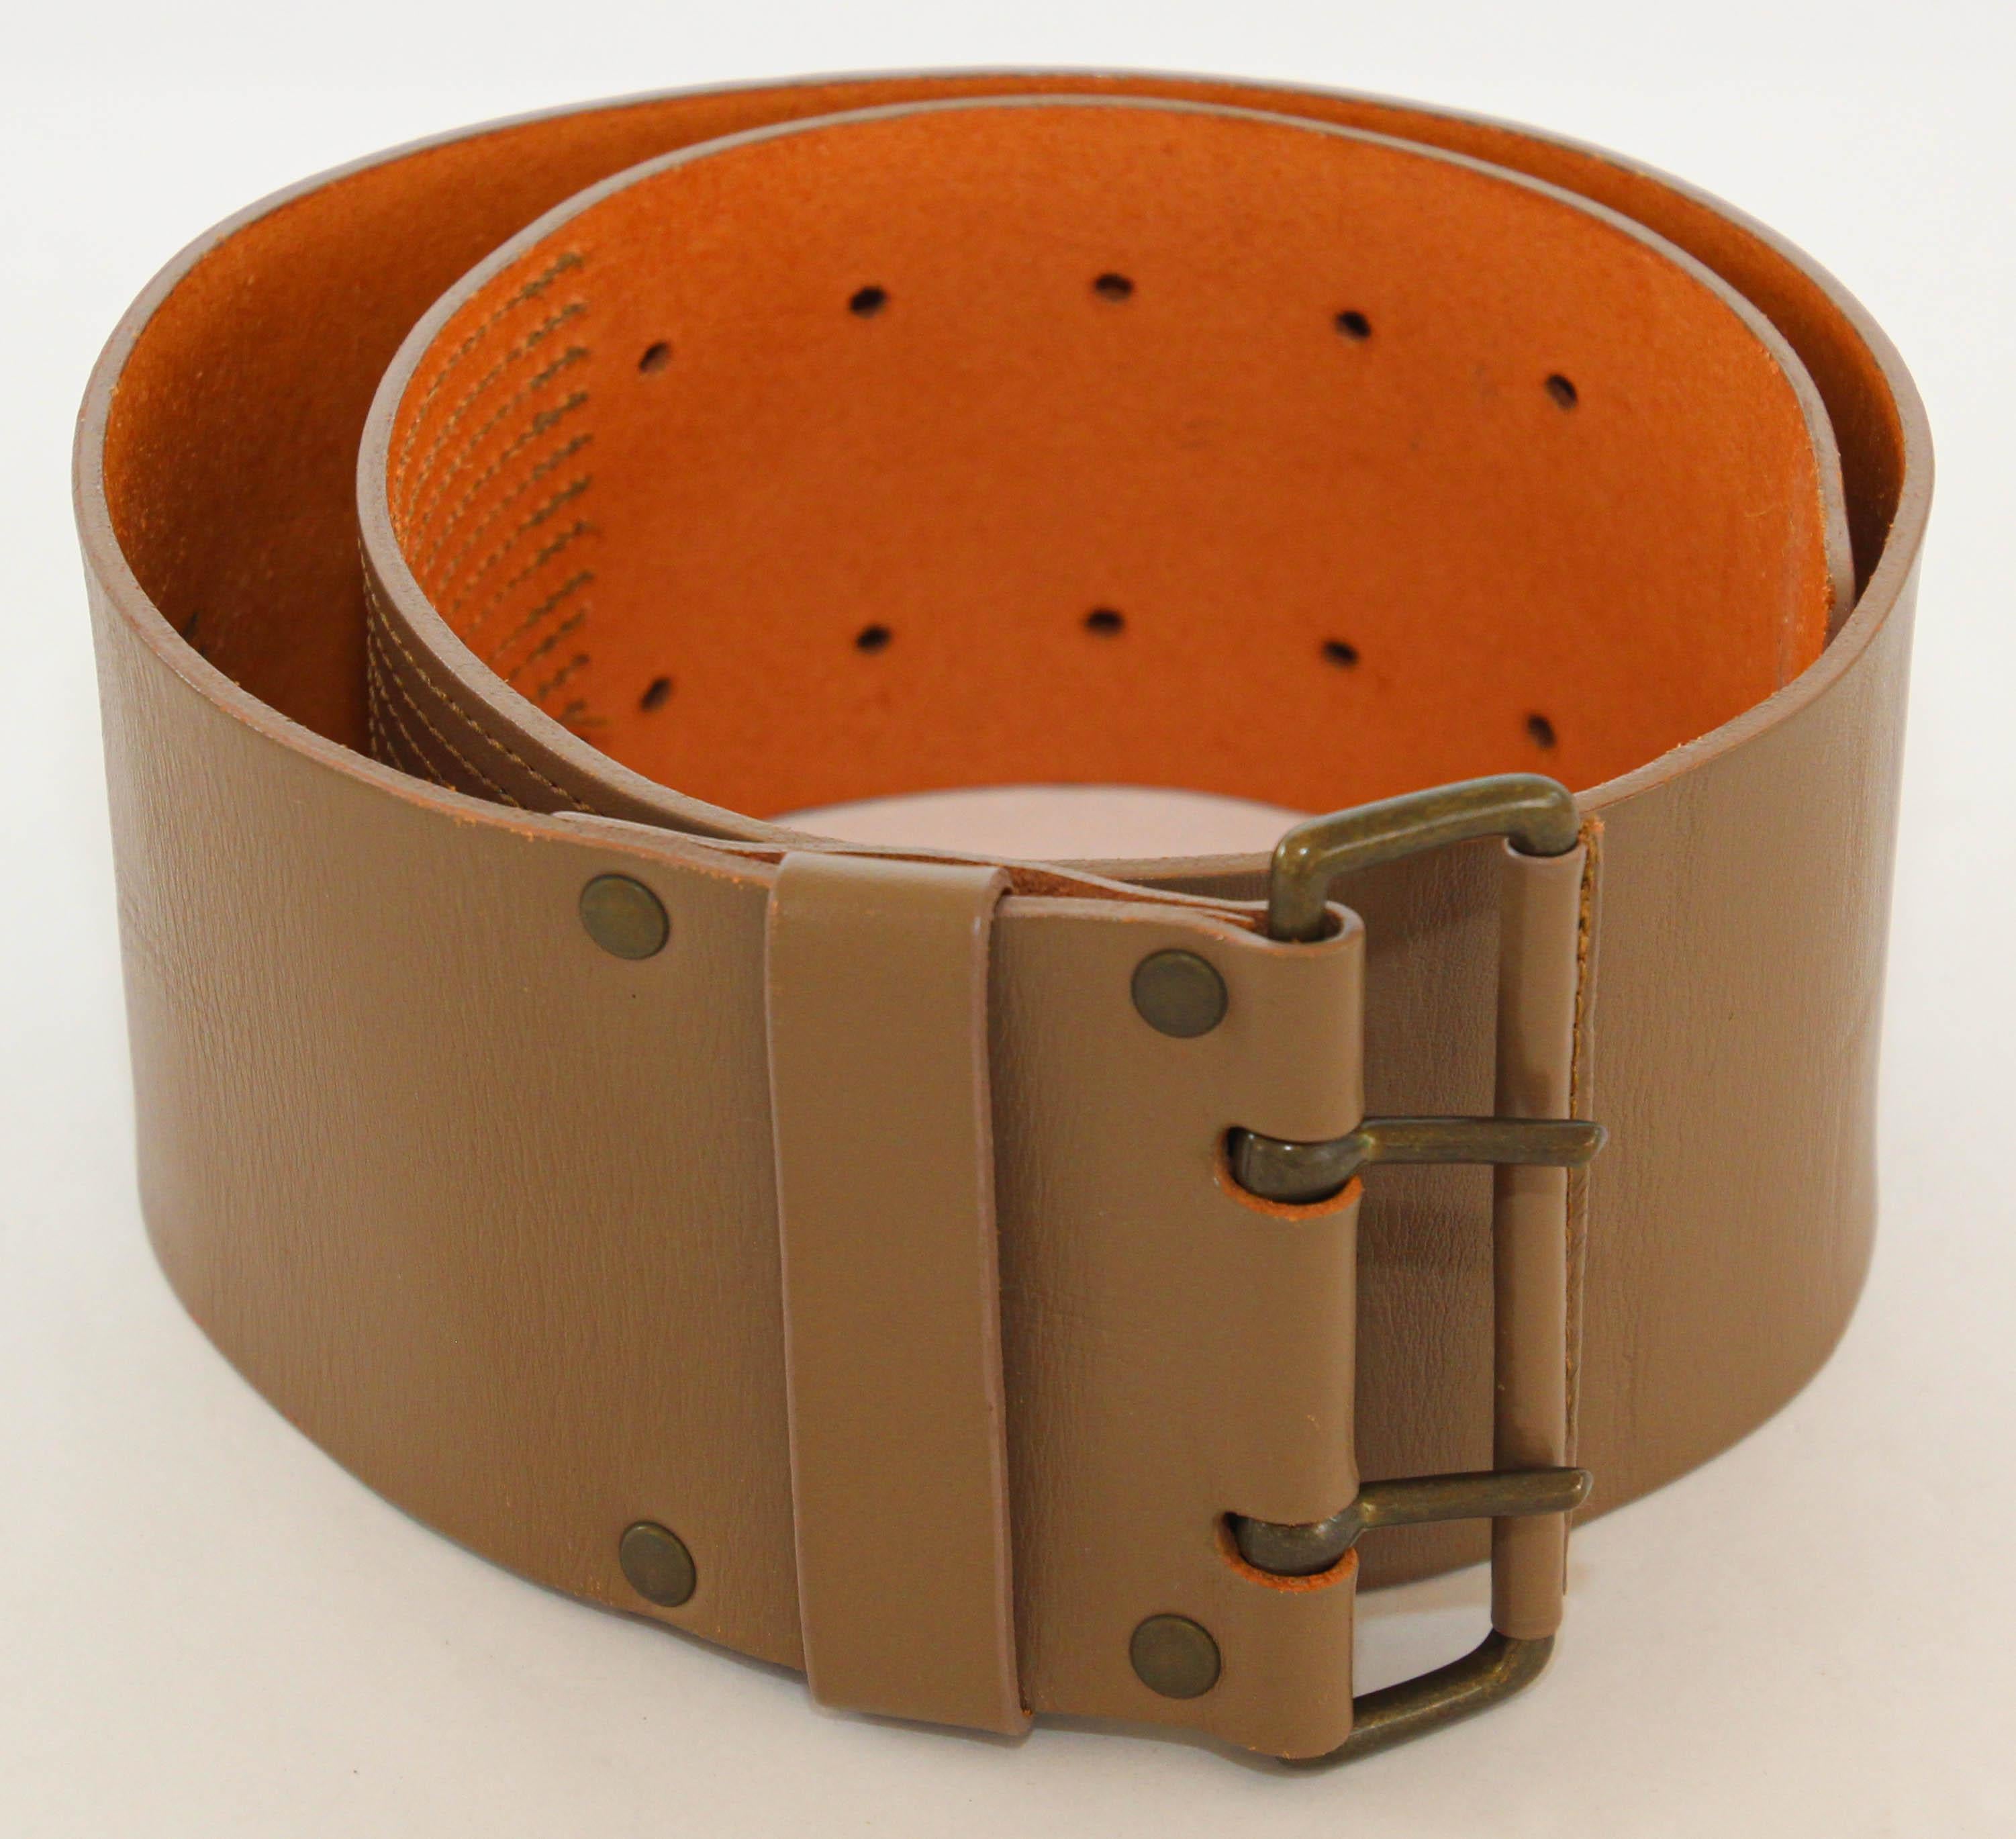 Dries Van Noten Oversized Wide Leather Waist Belt In Good Condition For Sale In North Hollywood, CA